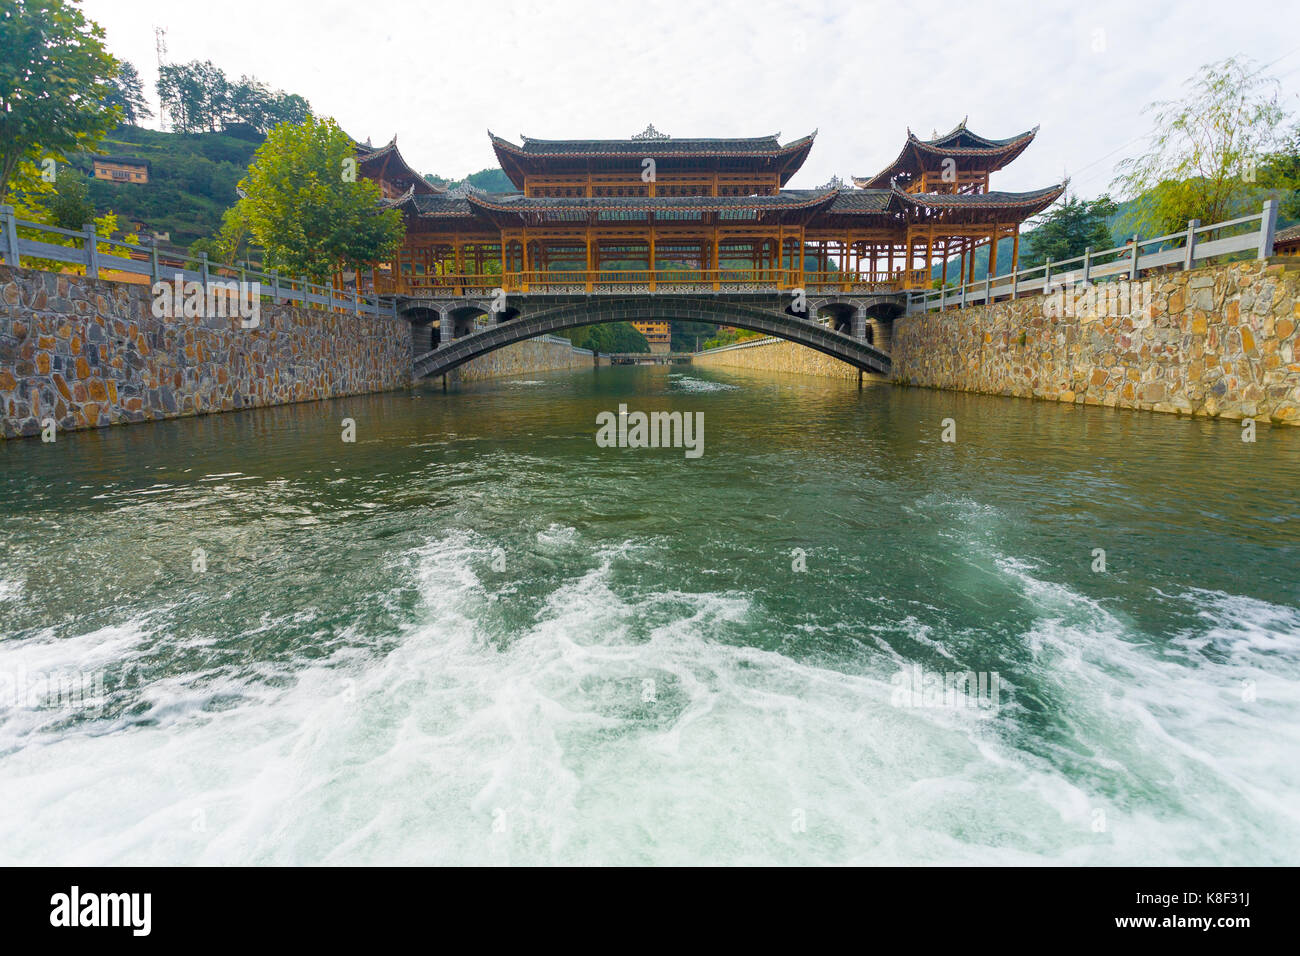 Low angle view of the traditional wooden bridge at Xijiang Miao ethnic minority village in Guizhou, China Stock Photo